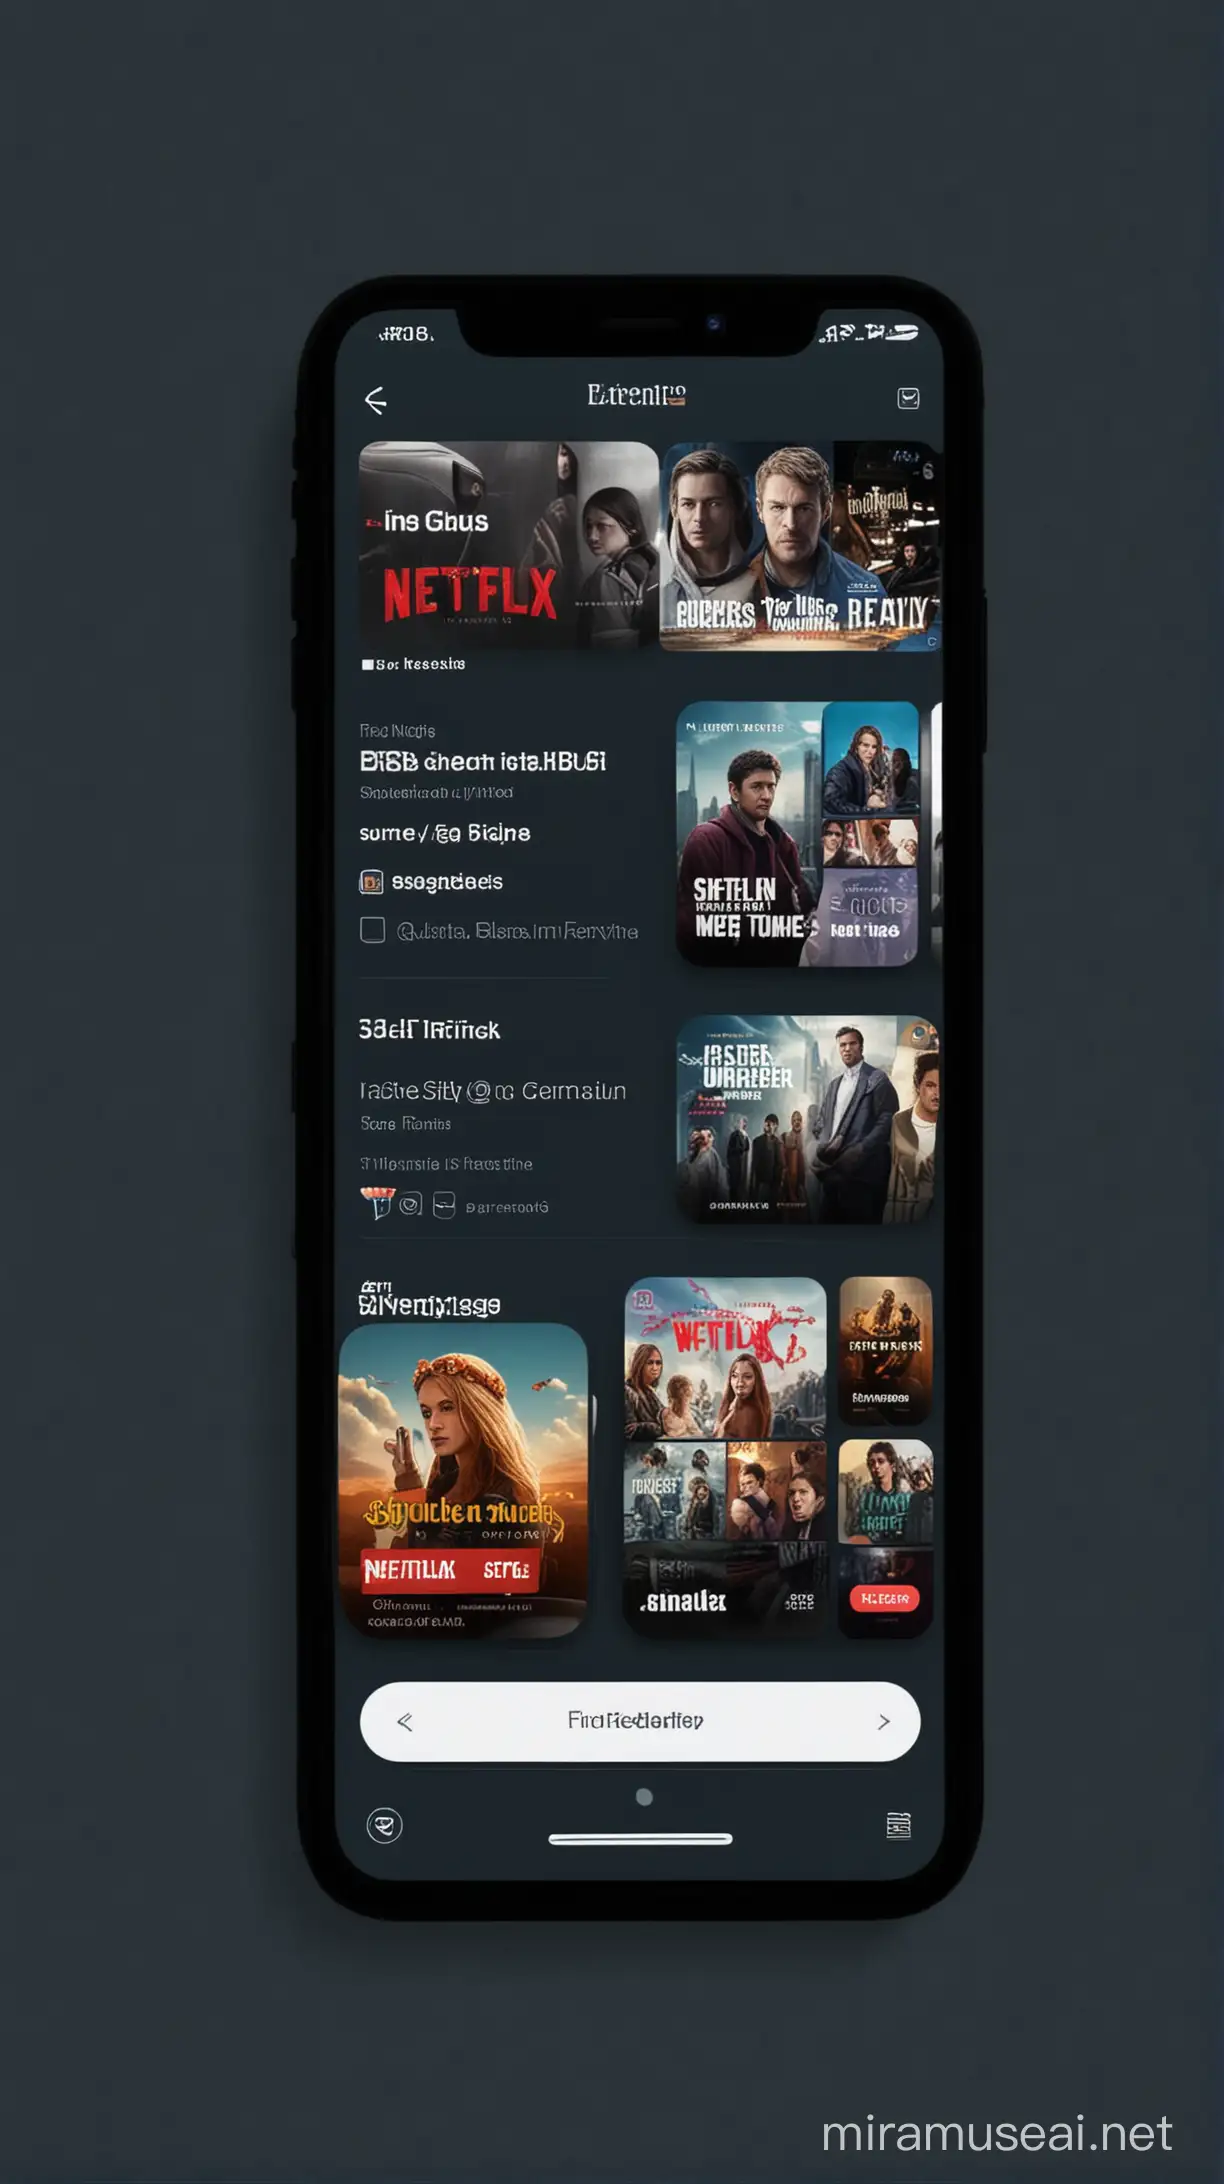 create a Home Screen web 3 style video streaming app like Netflix, color are black, dark blue and white